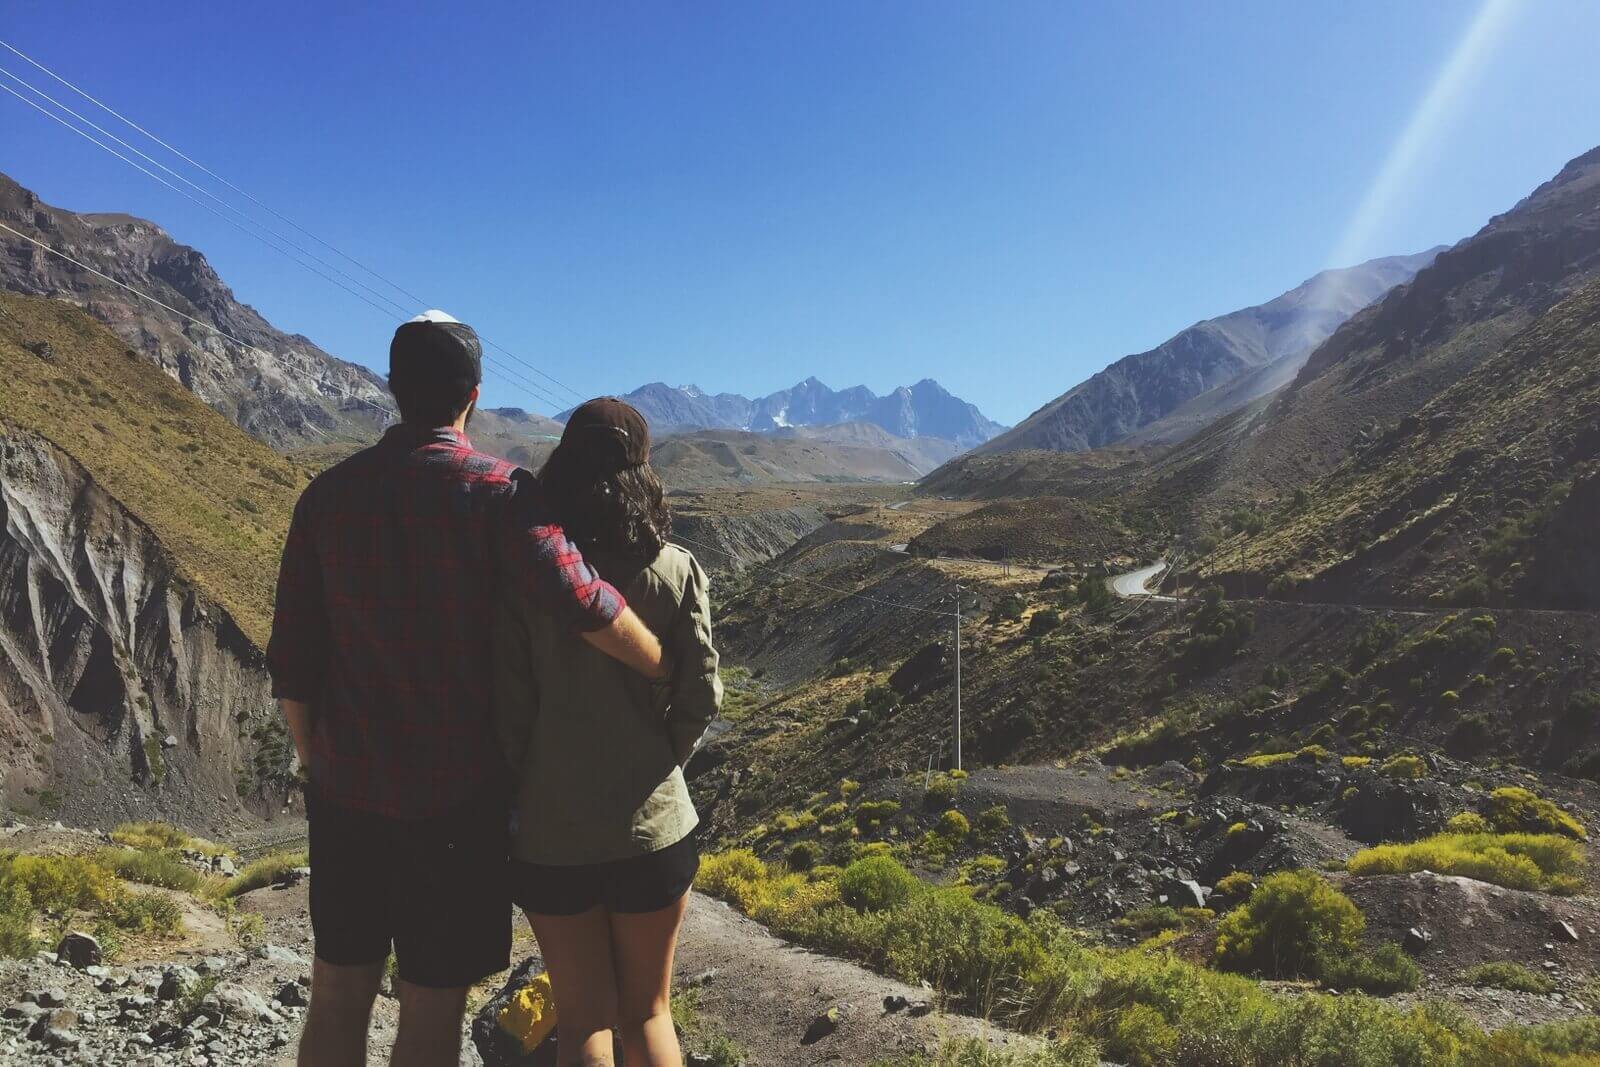 Me and my beloved Carina and the monumental Cajon del Maipo mountains.